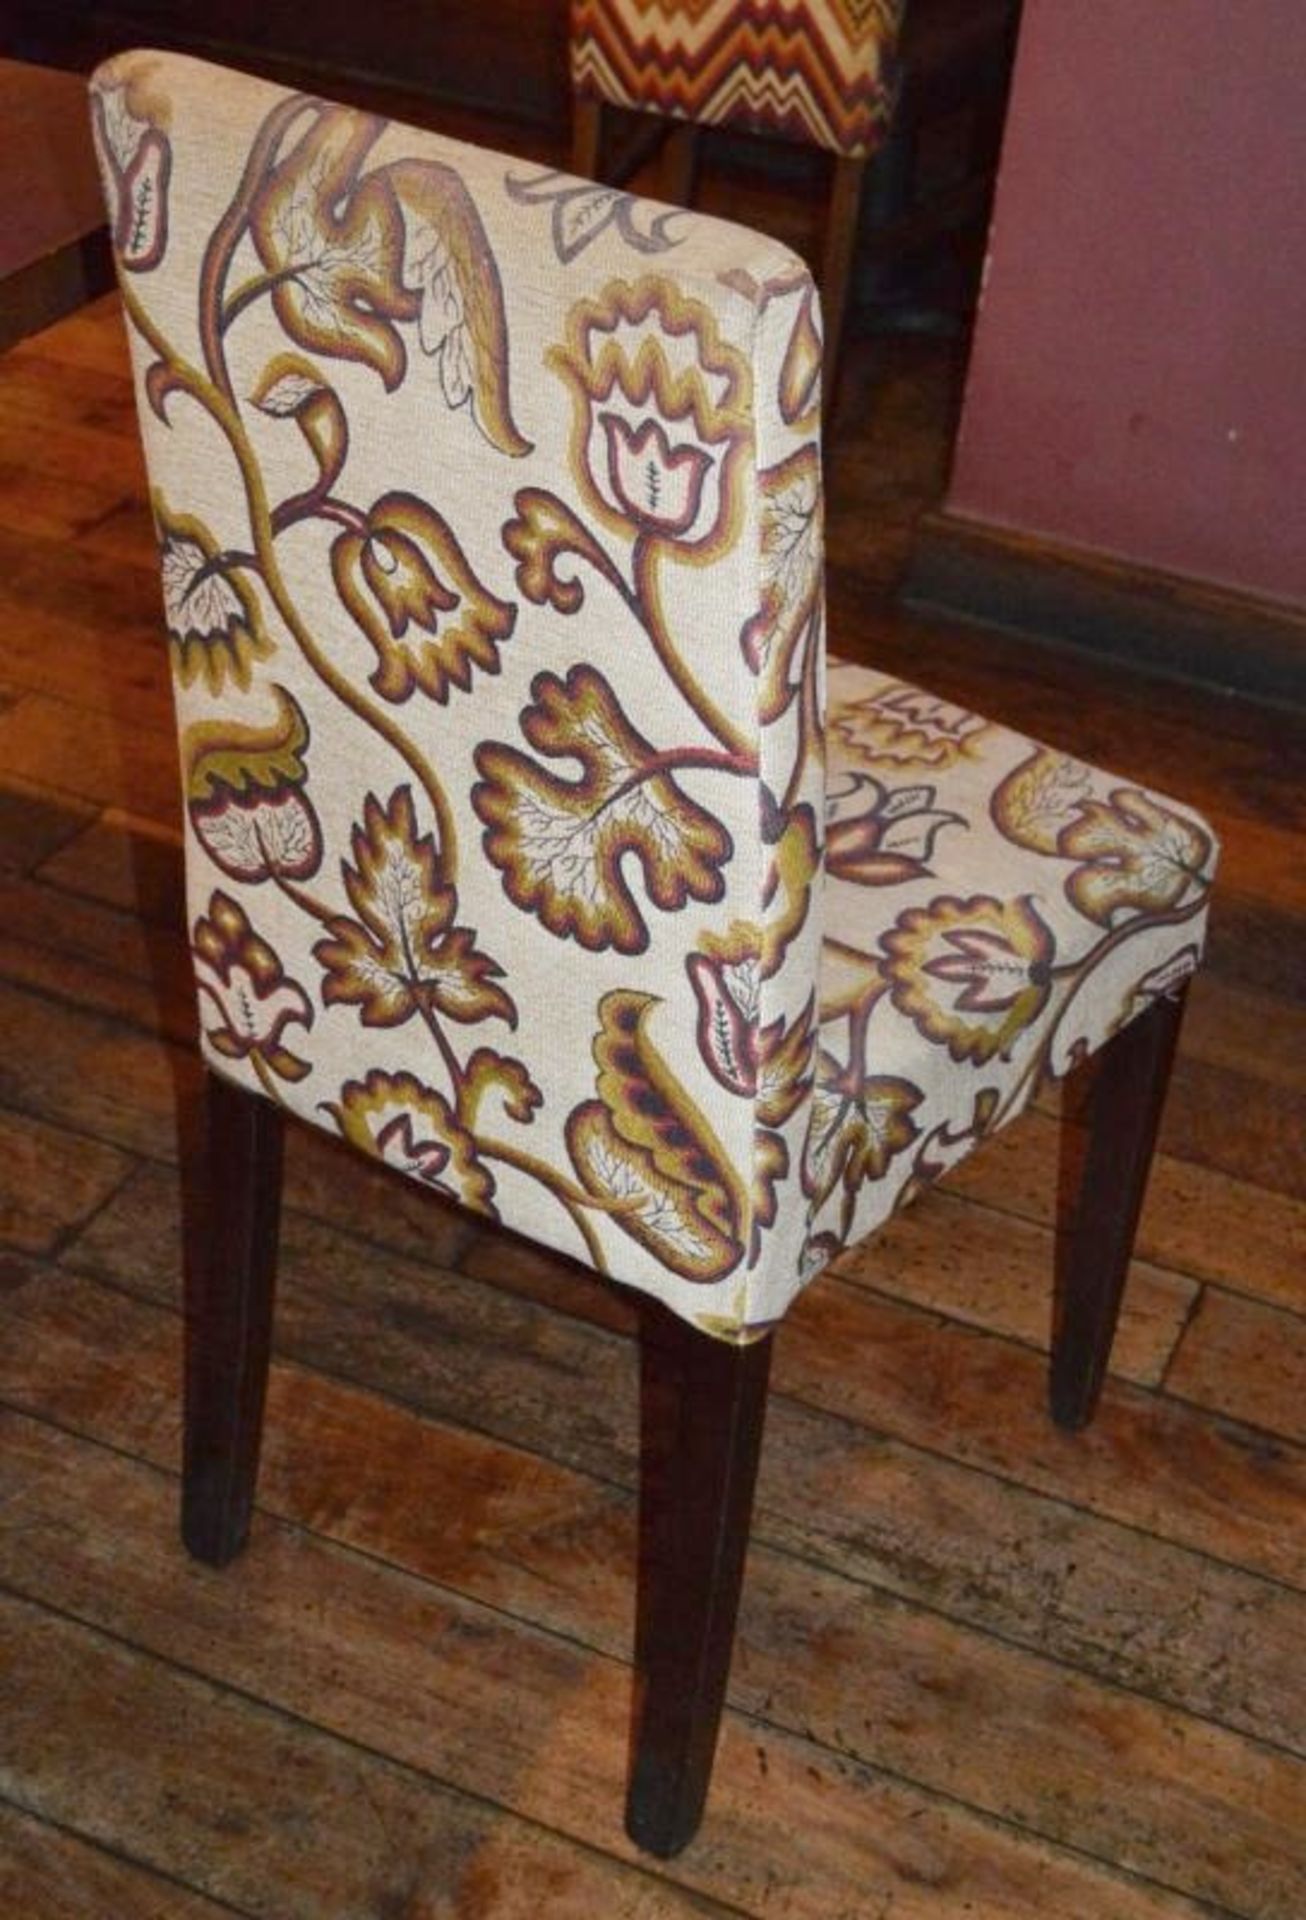 6 x Upholstered Restaurant Dining Chairs In A Floral Mexican-style Fabric - Image 3 of 3